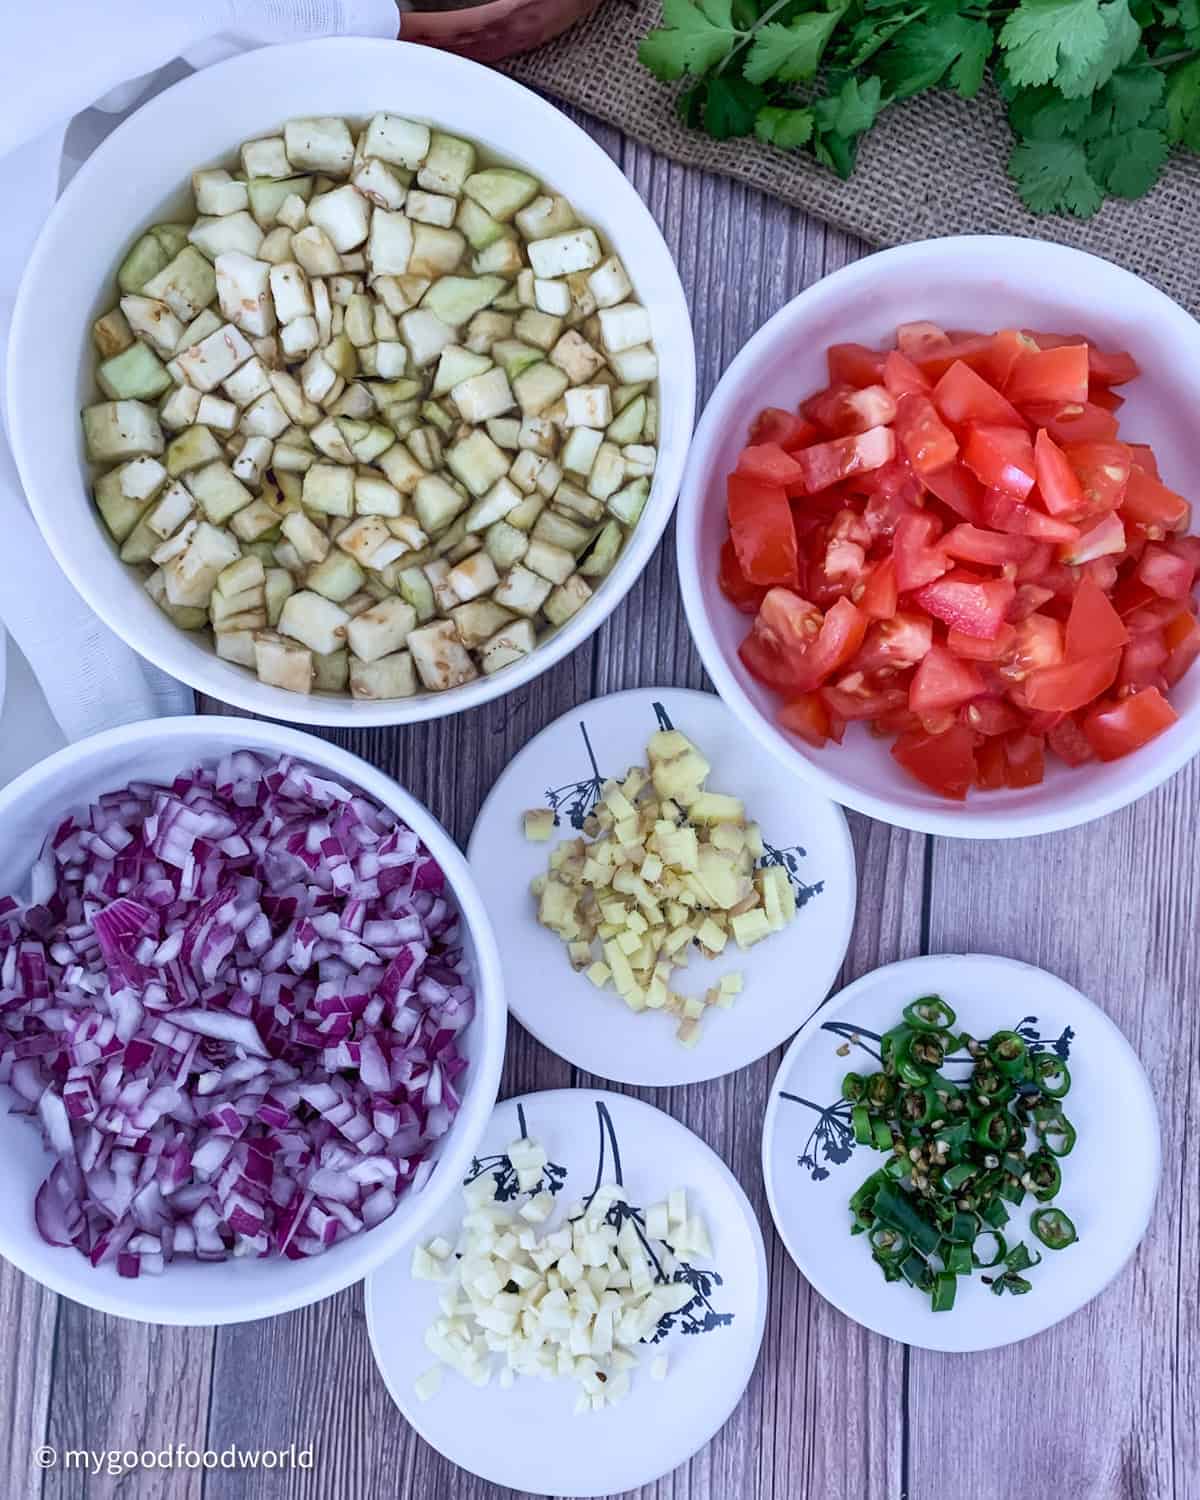 Finely chopped eggplants, onion, ginger, garlic, chili pepper, and tomatoes placed in round bowls and plates on a brown table.